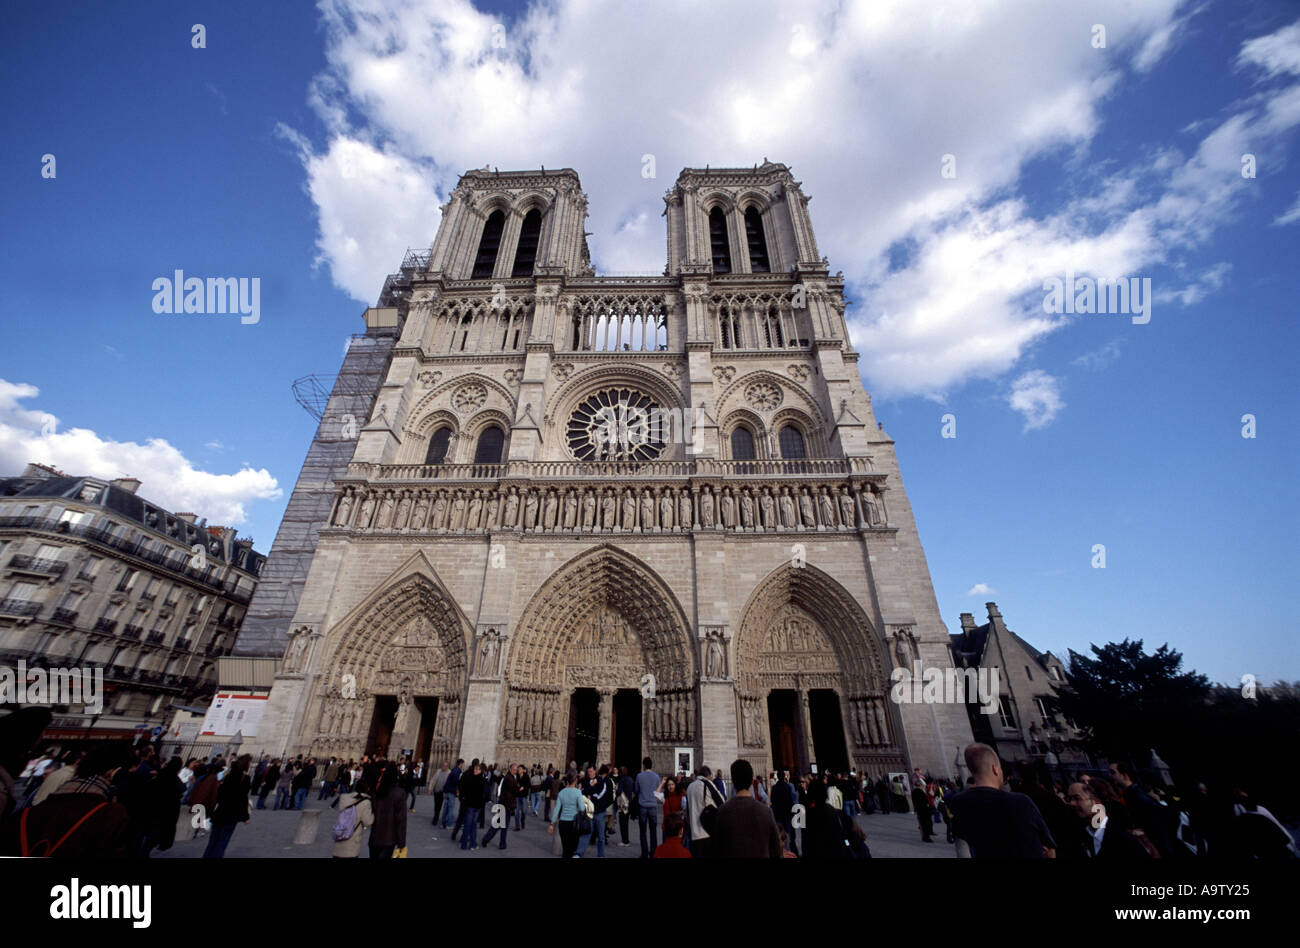 Front of Notre Dame cathederal in Paris France Stock Photo